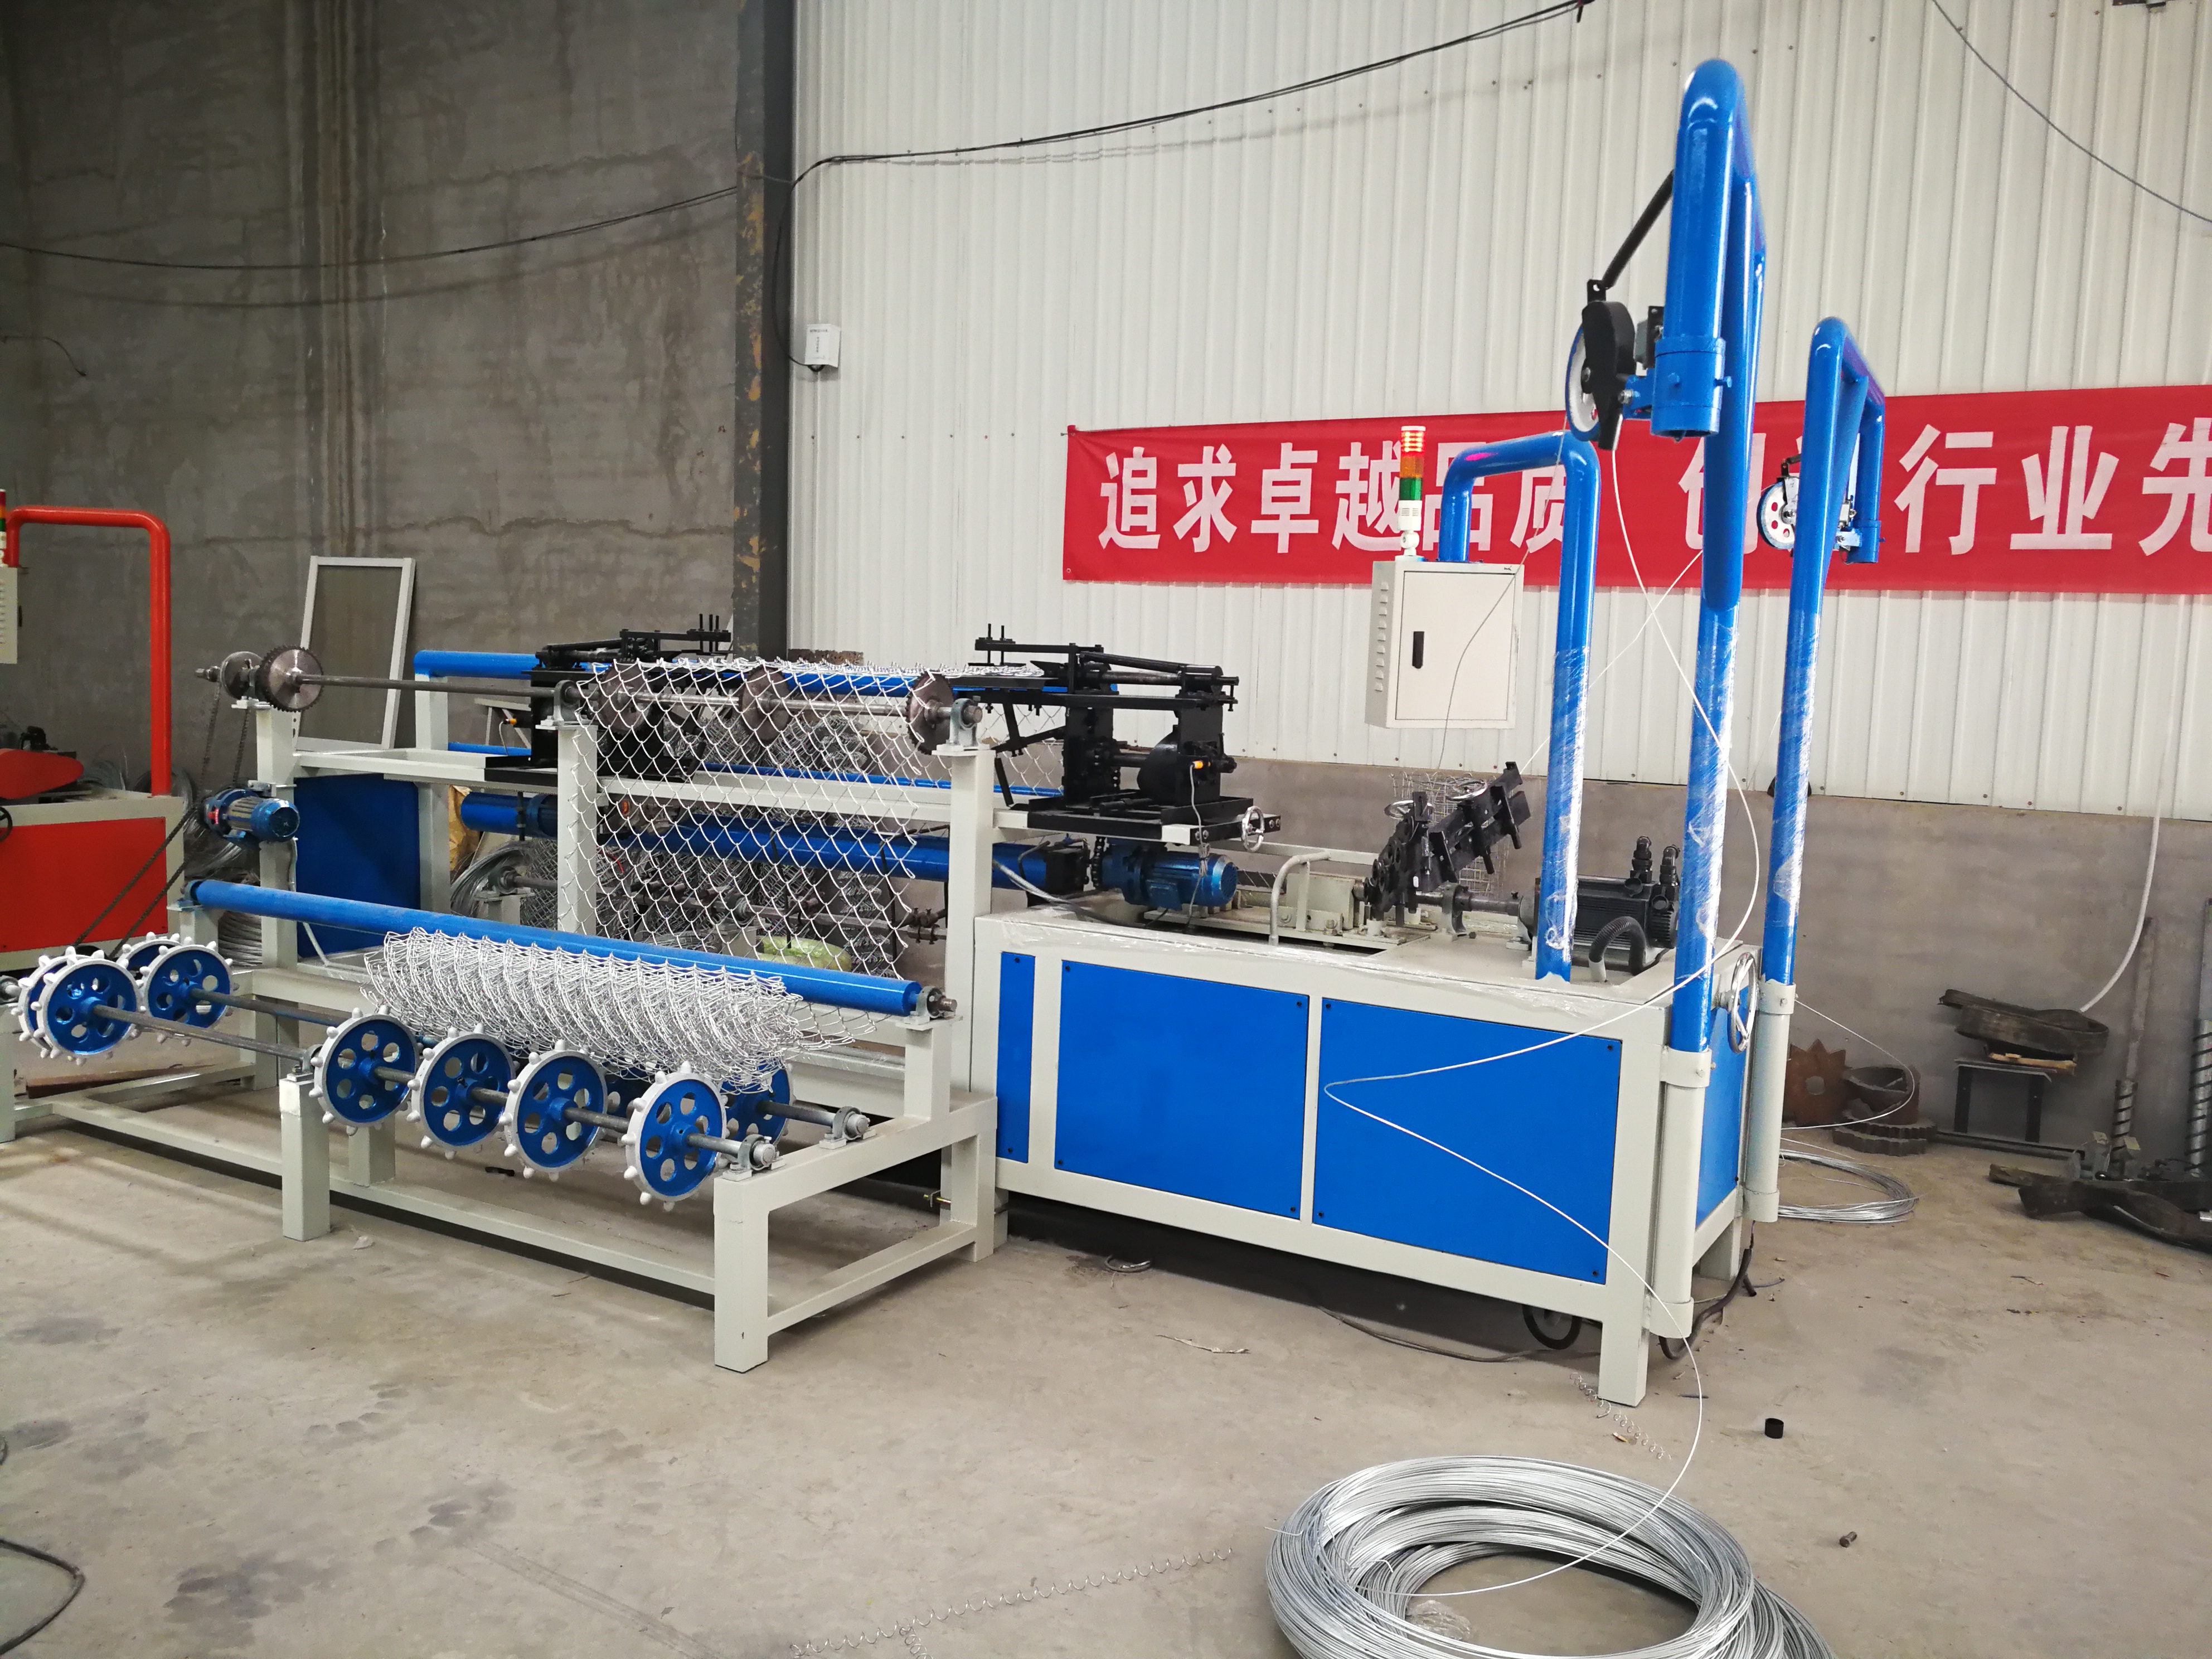 Buying skills for electrowelded mesh machine by feeding straightened rods